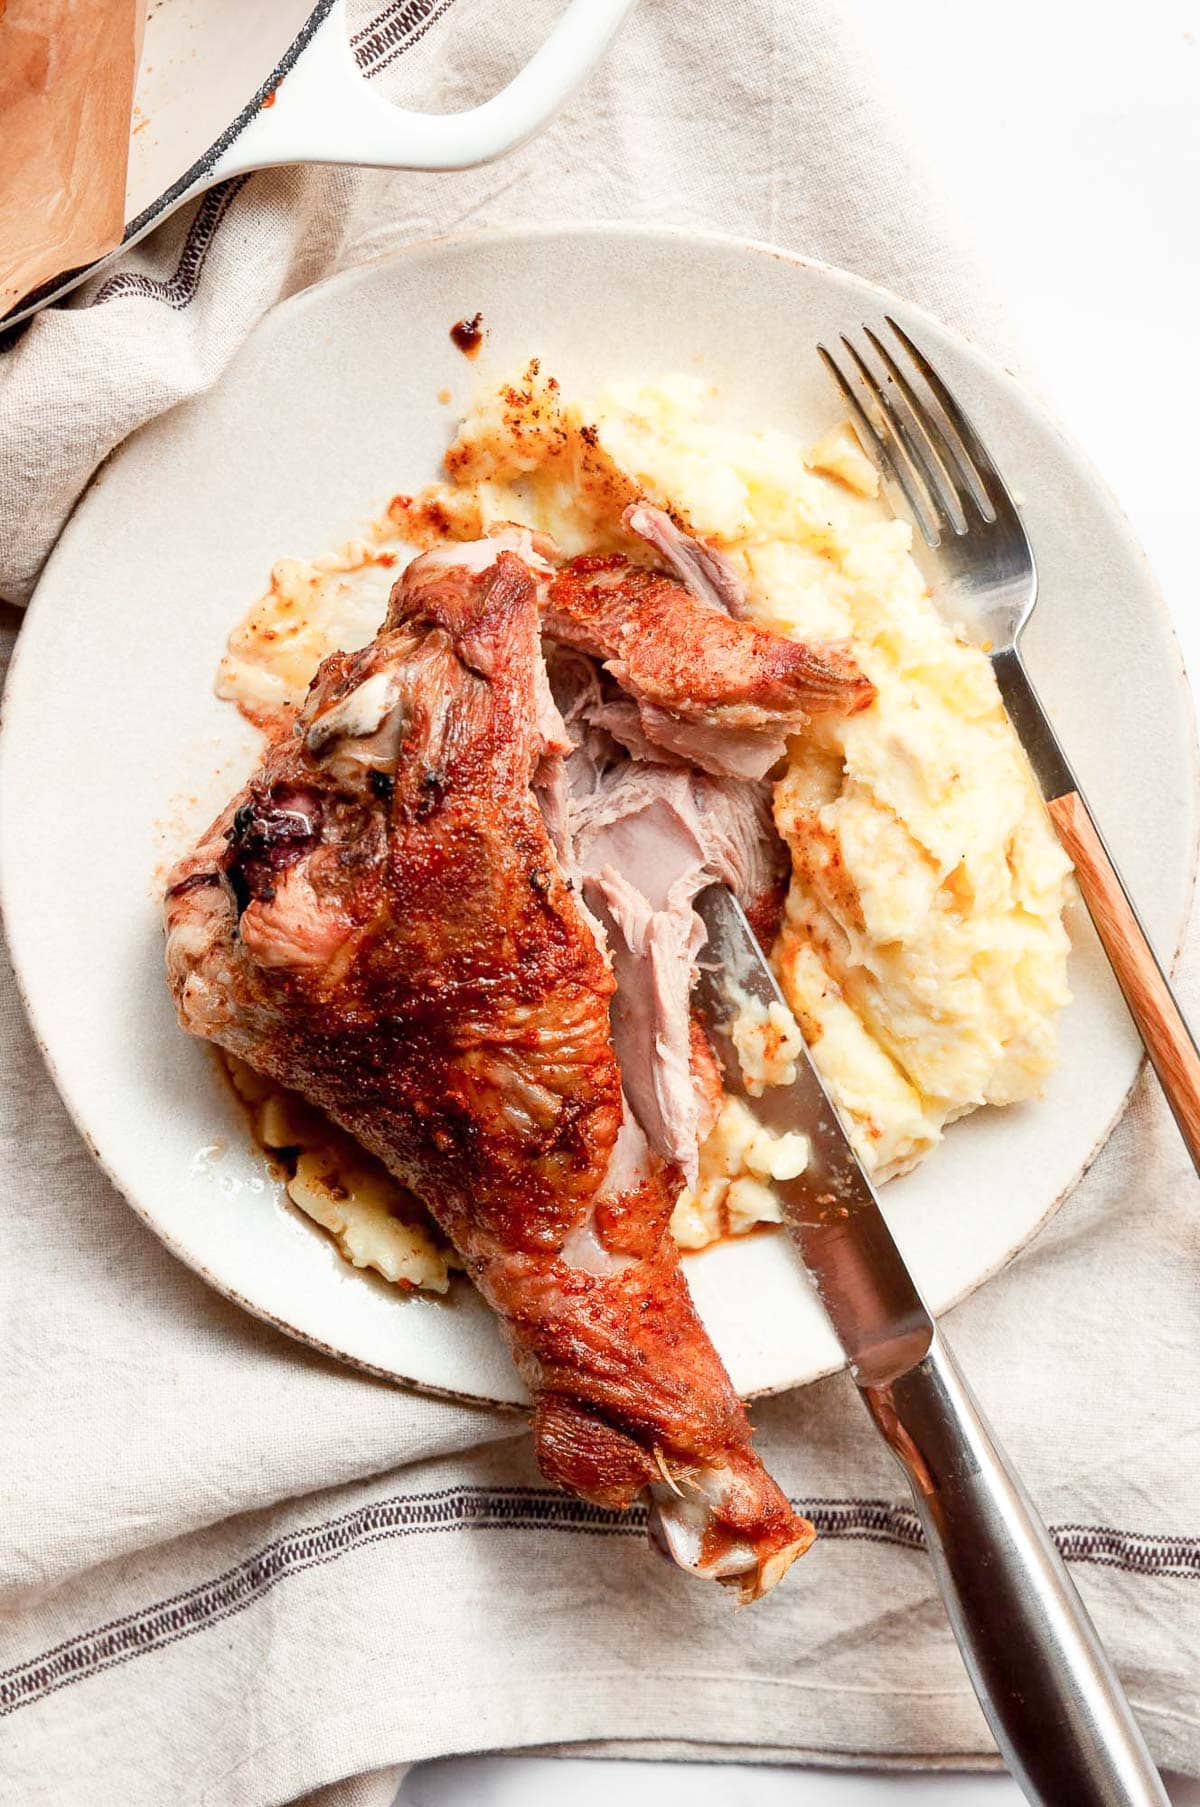 Oven roasted turkey leg showing meat texture and mashed potatoes with a knife and fork on a plate.